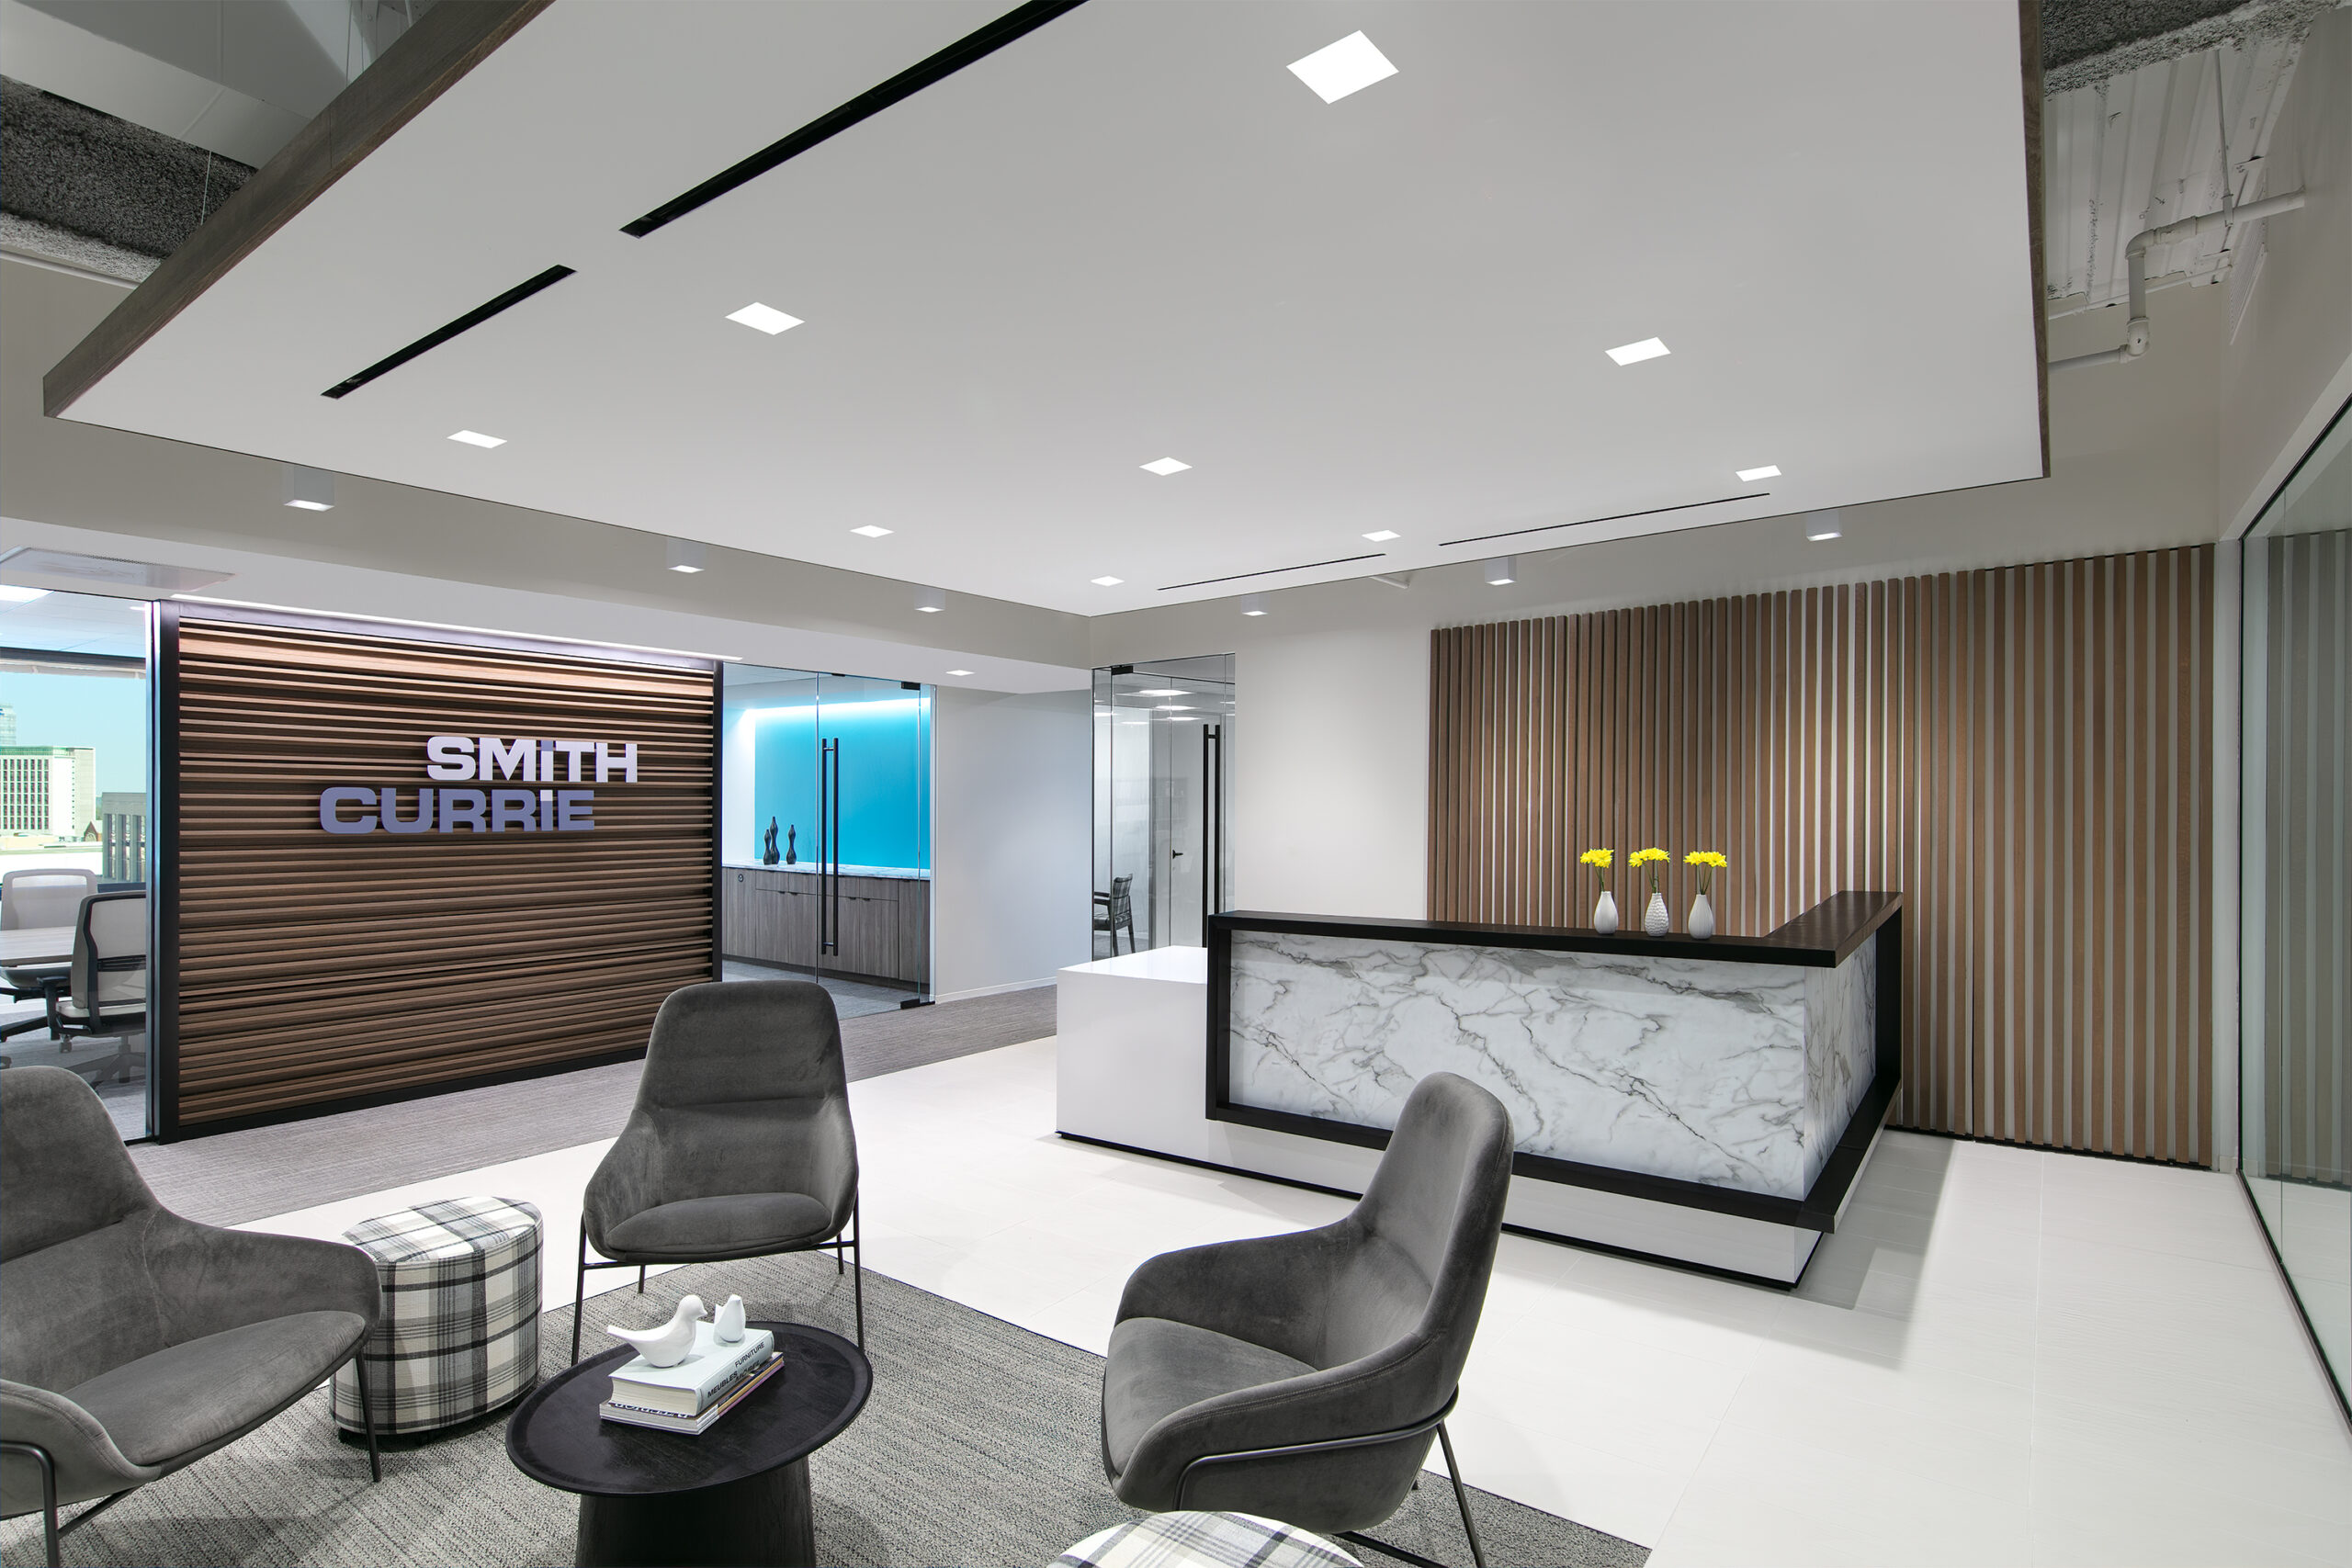 Smith, Currie & Hancock LLP